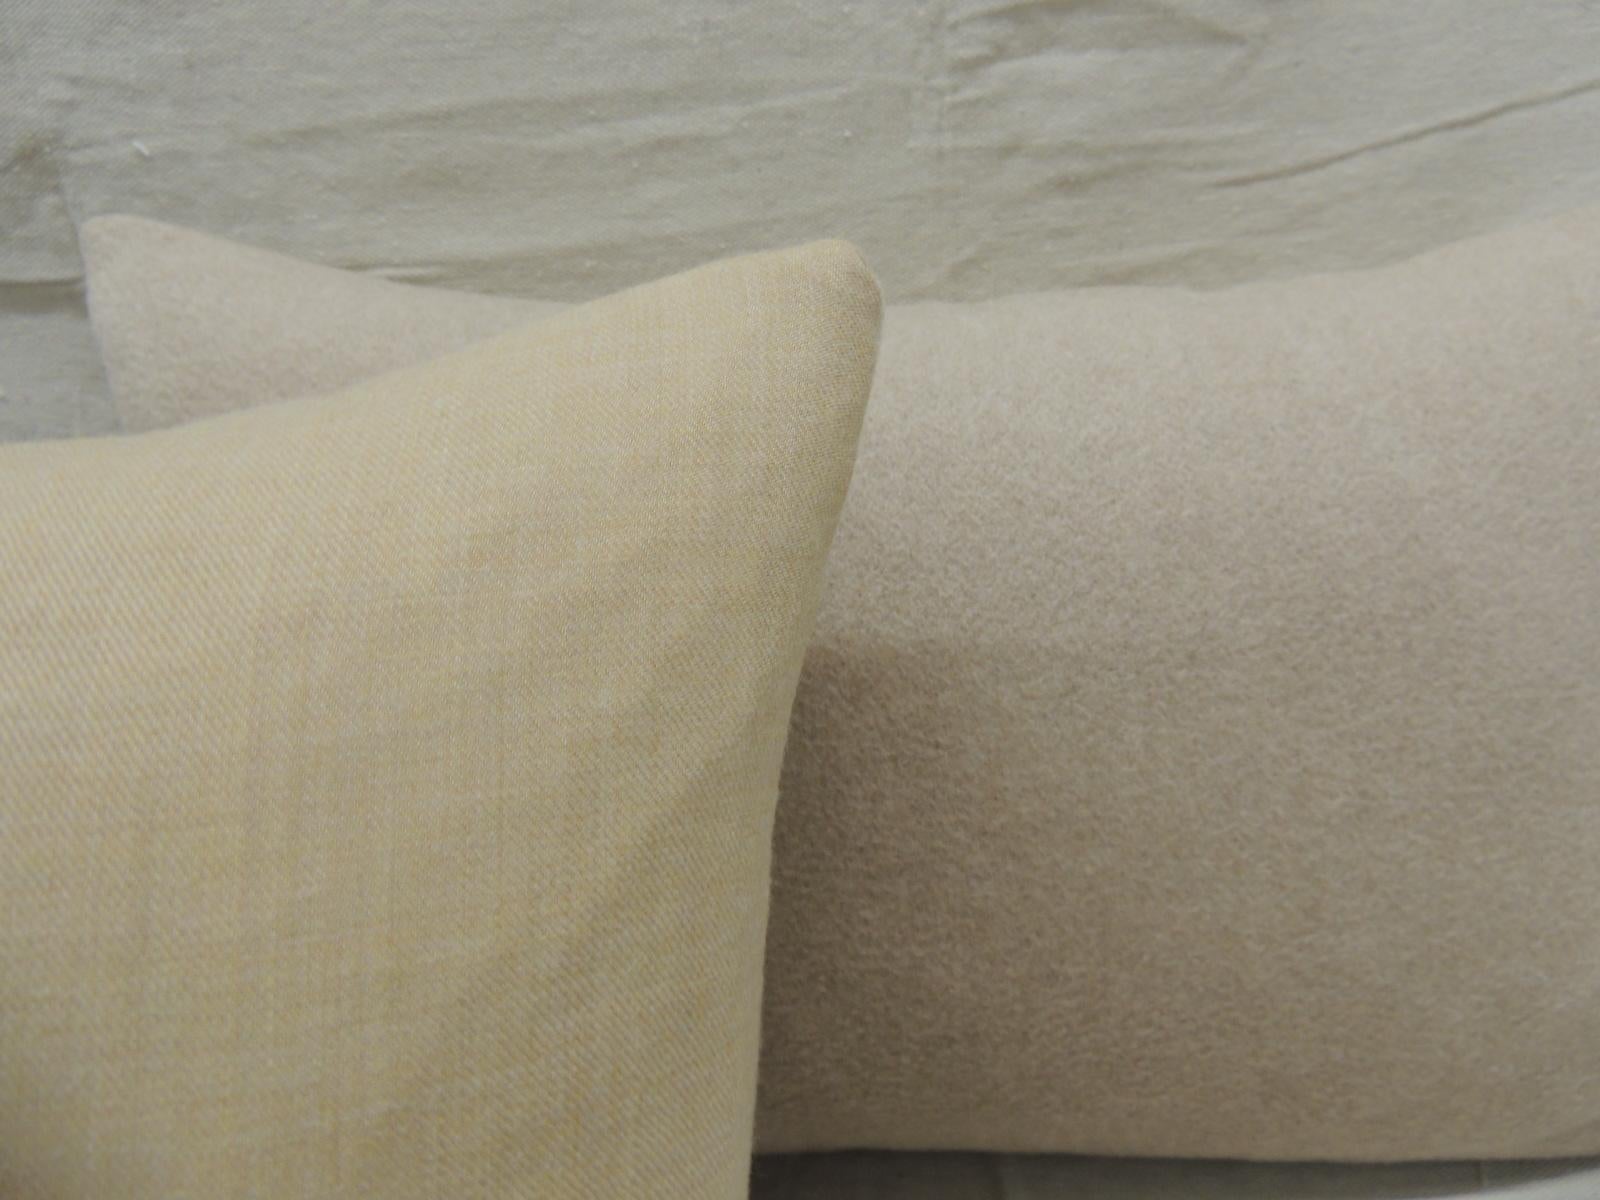 Hand-Crafted Pair of Beige Tone-on-Tone Loro Piana Cashmere Decorative Lumbar Pillows